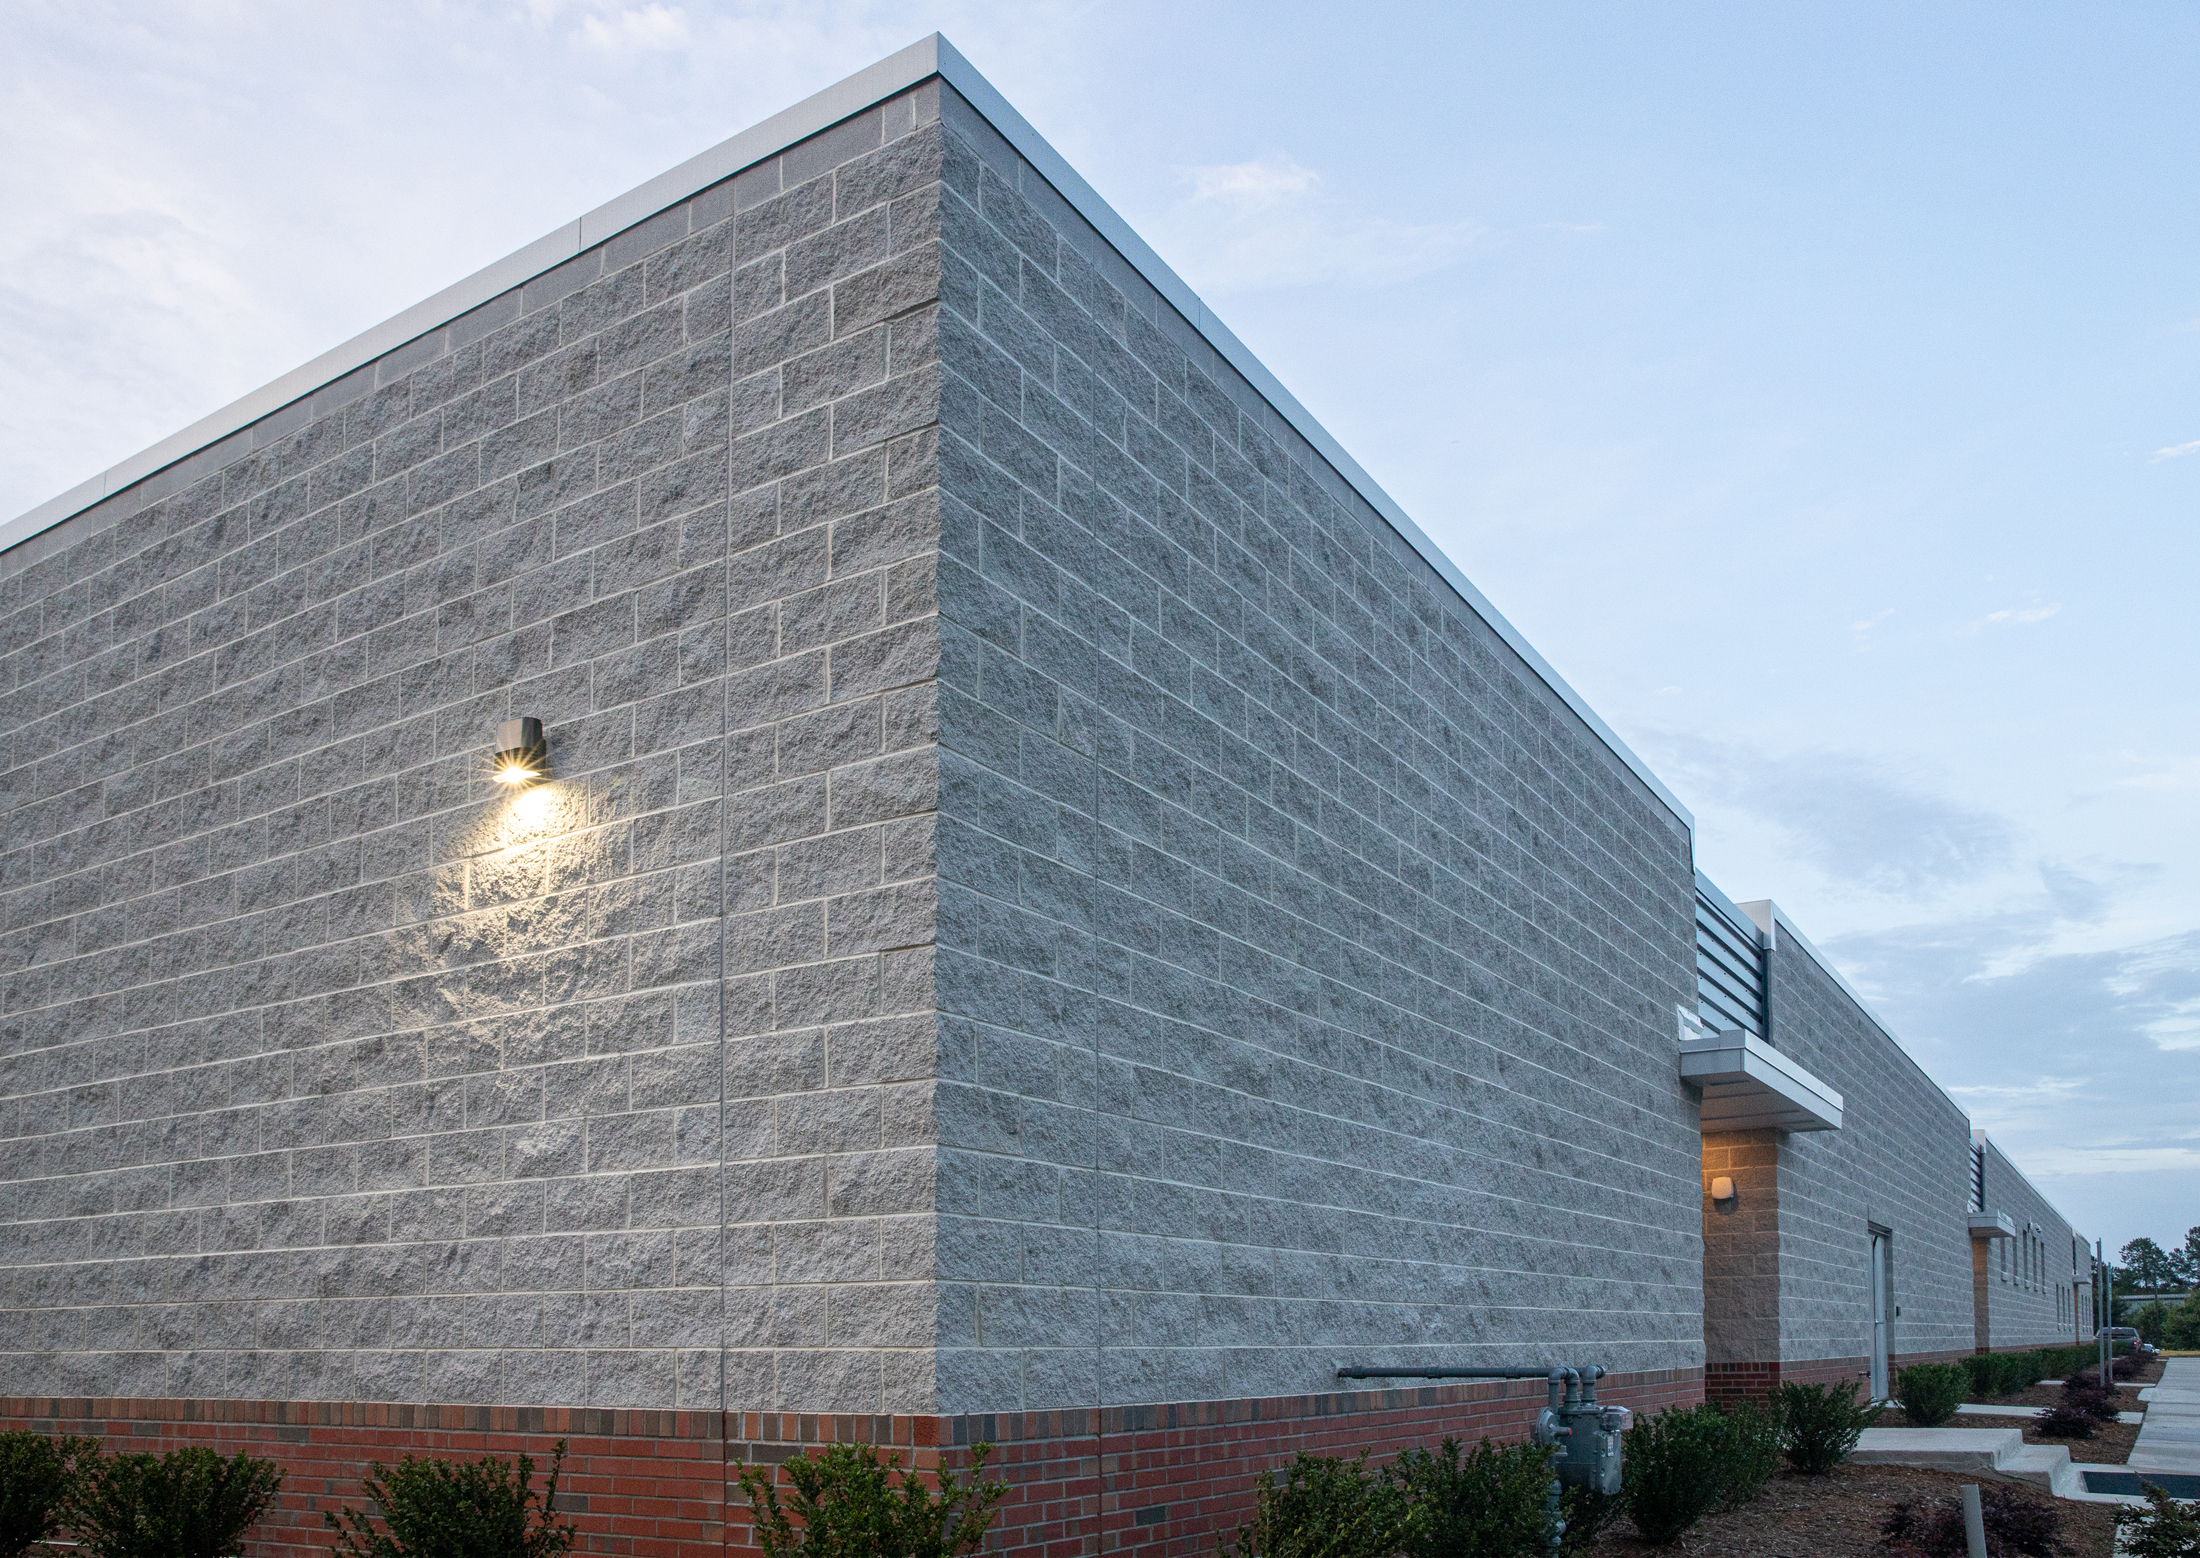 Raleigh Police Department in Raleigh, NC featuring Prestige Masonry Architectural Block - Split Face in Fountain Geyser